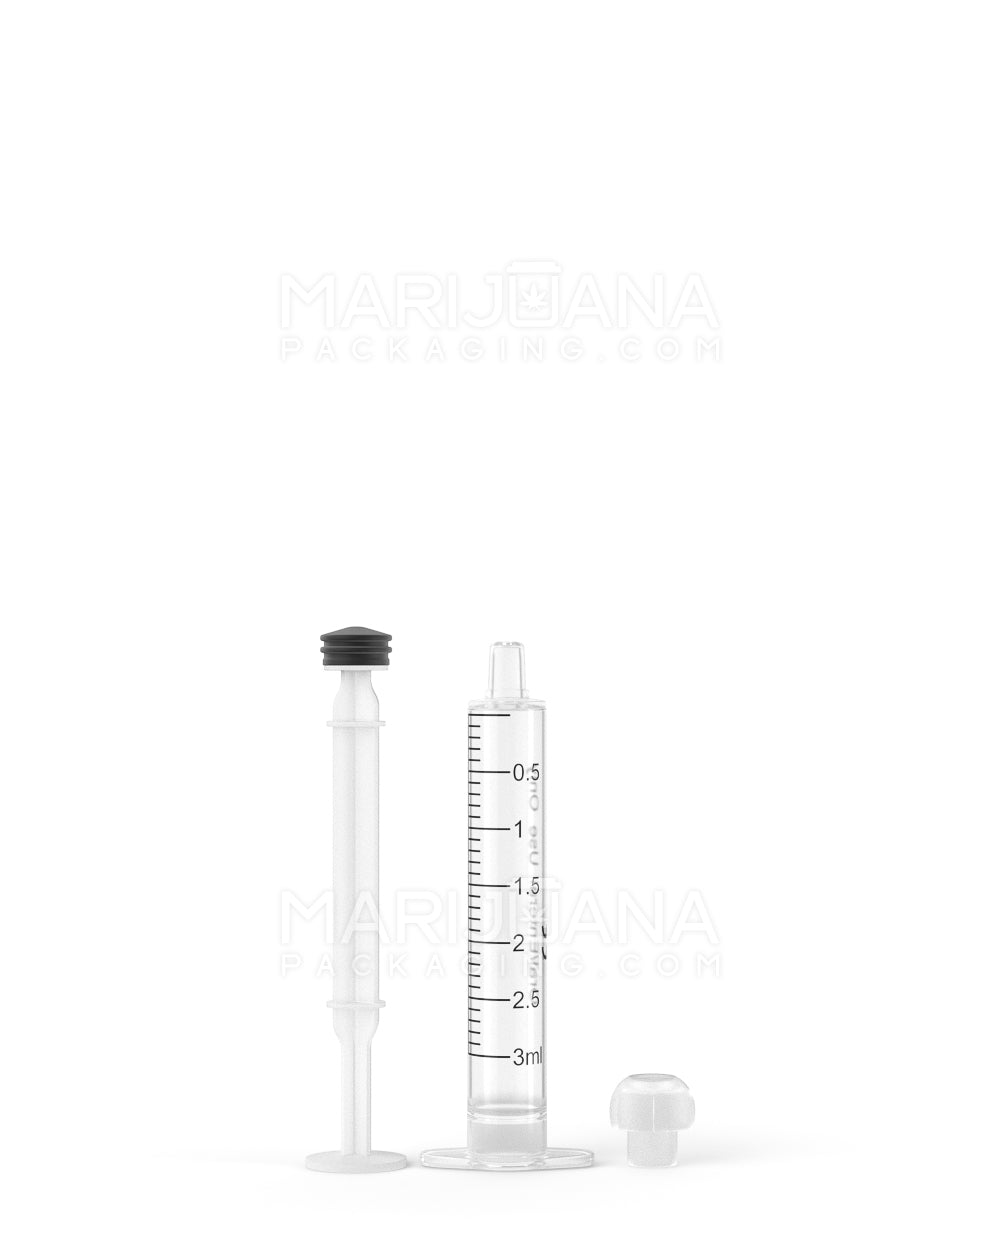 Plastic Oral Concentrate Syringes | 3mL - 0.5mL Increments - 100 Count - 3